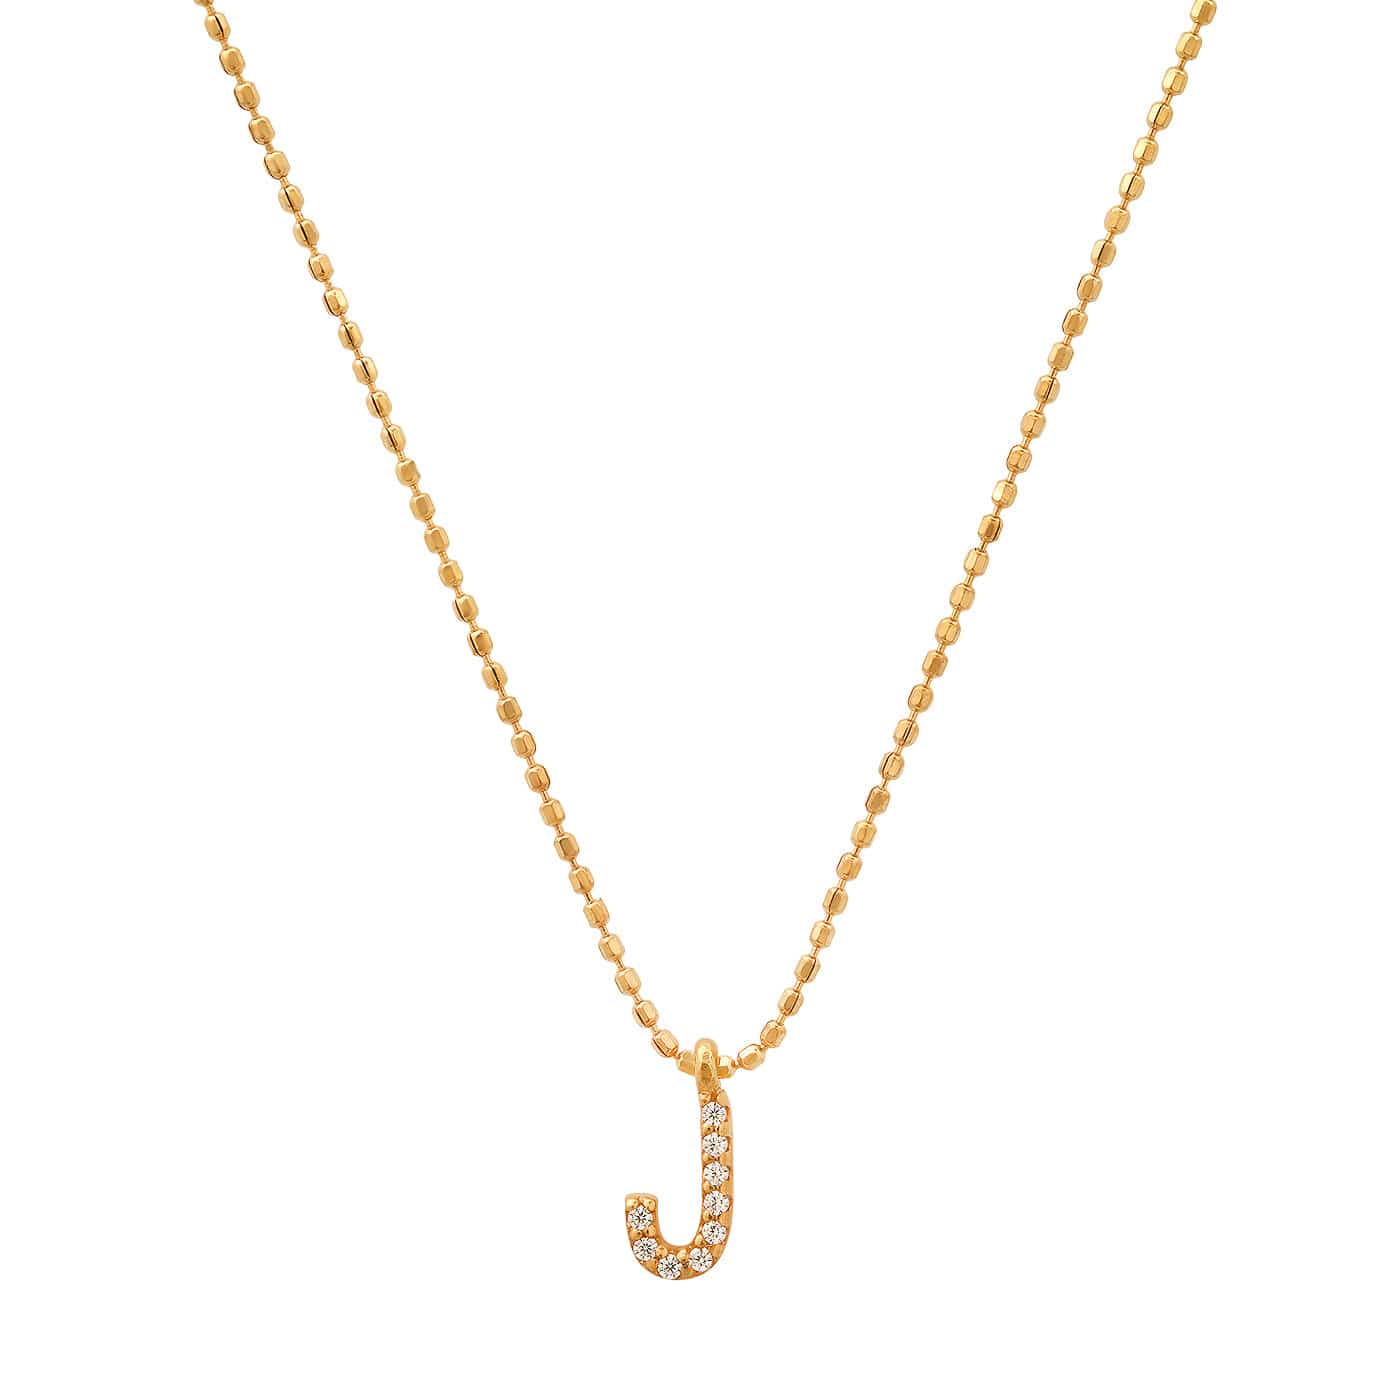 TAI JEWELRY Necklace J Pave Initial Ball Chain Necklace